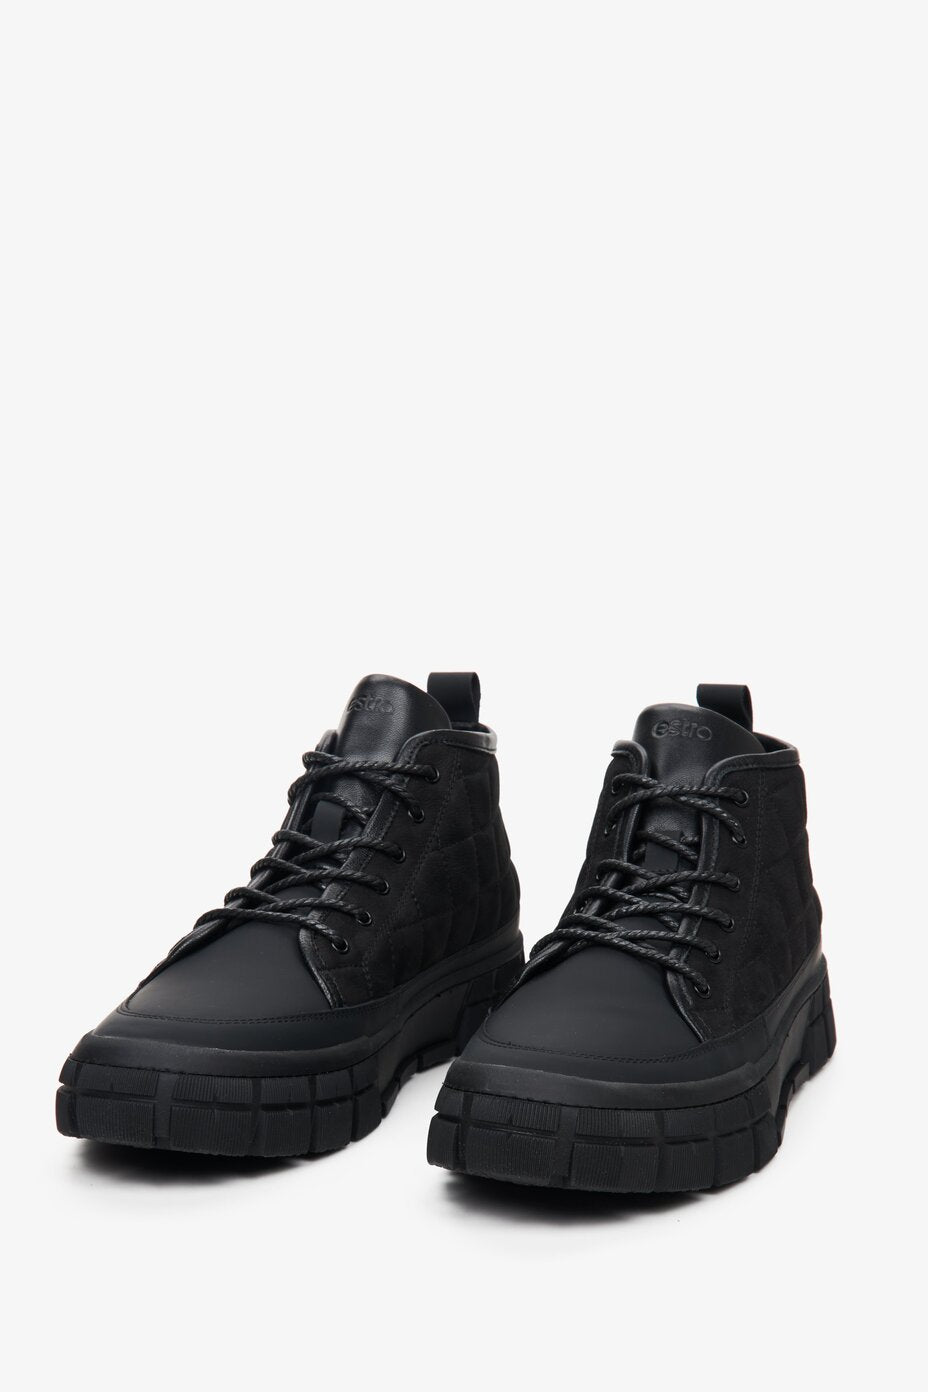 Men's black high-top lace-up winter boots by Estro.